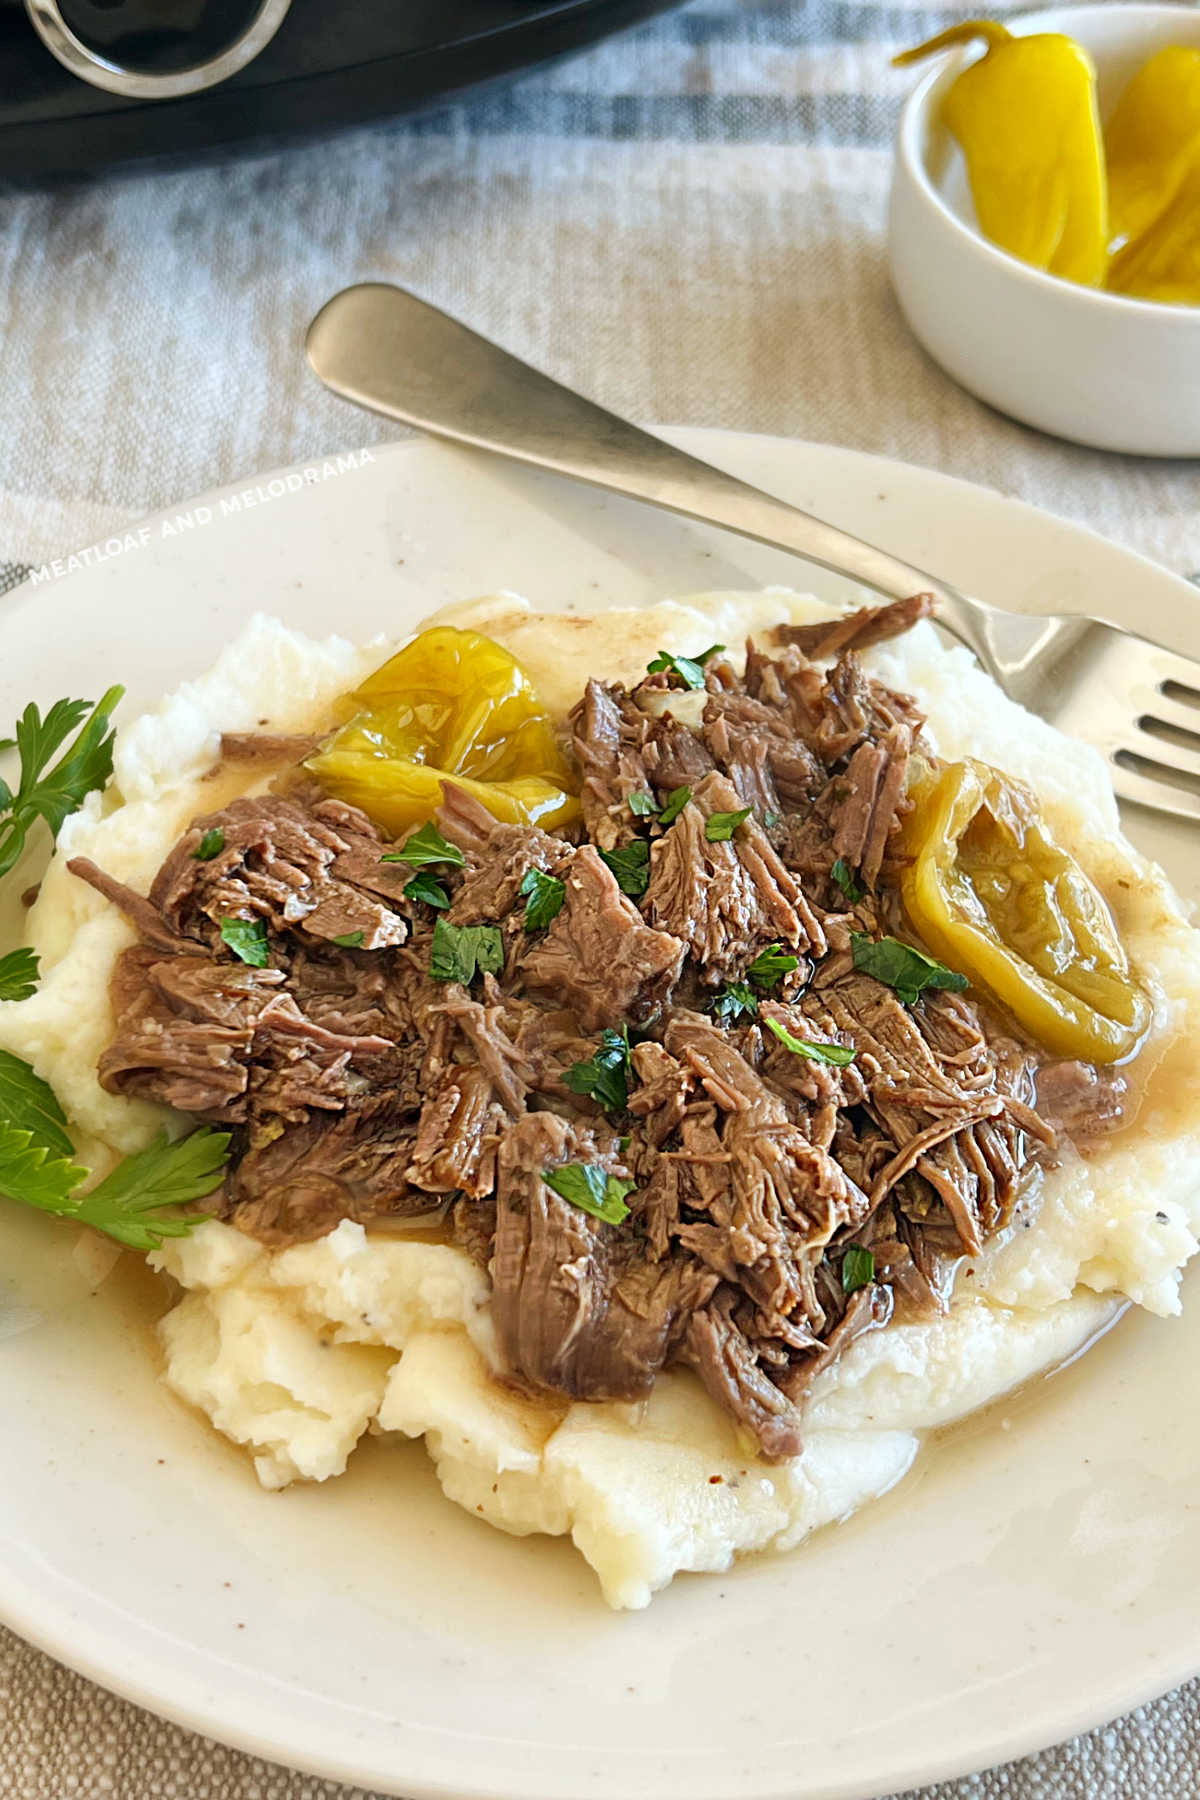 shredded mississippi pot roast and peperoncini peppers over mashed potatoes